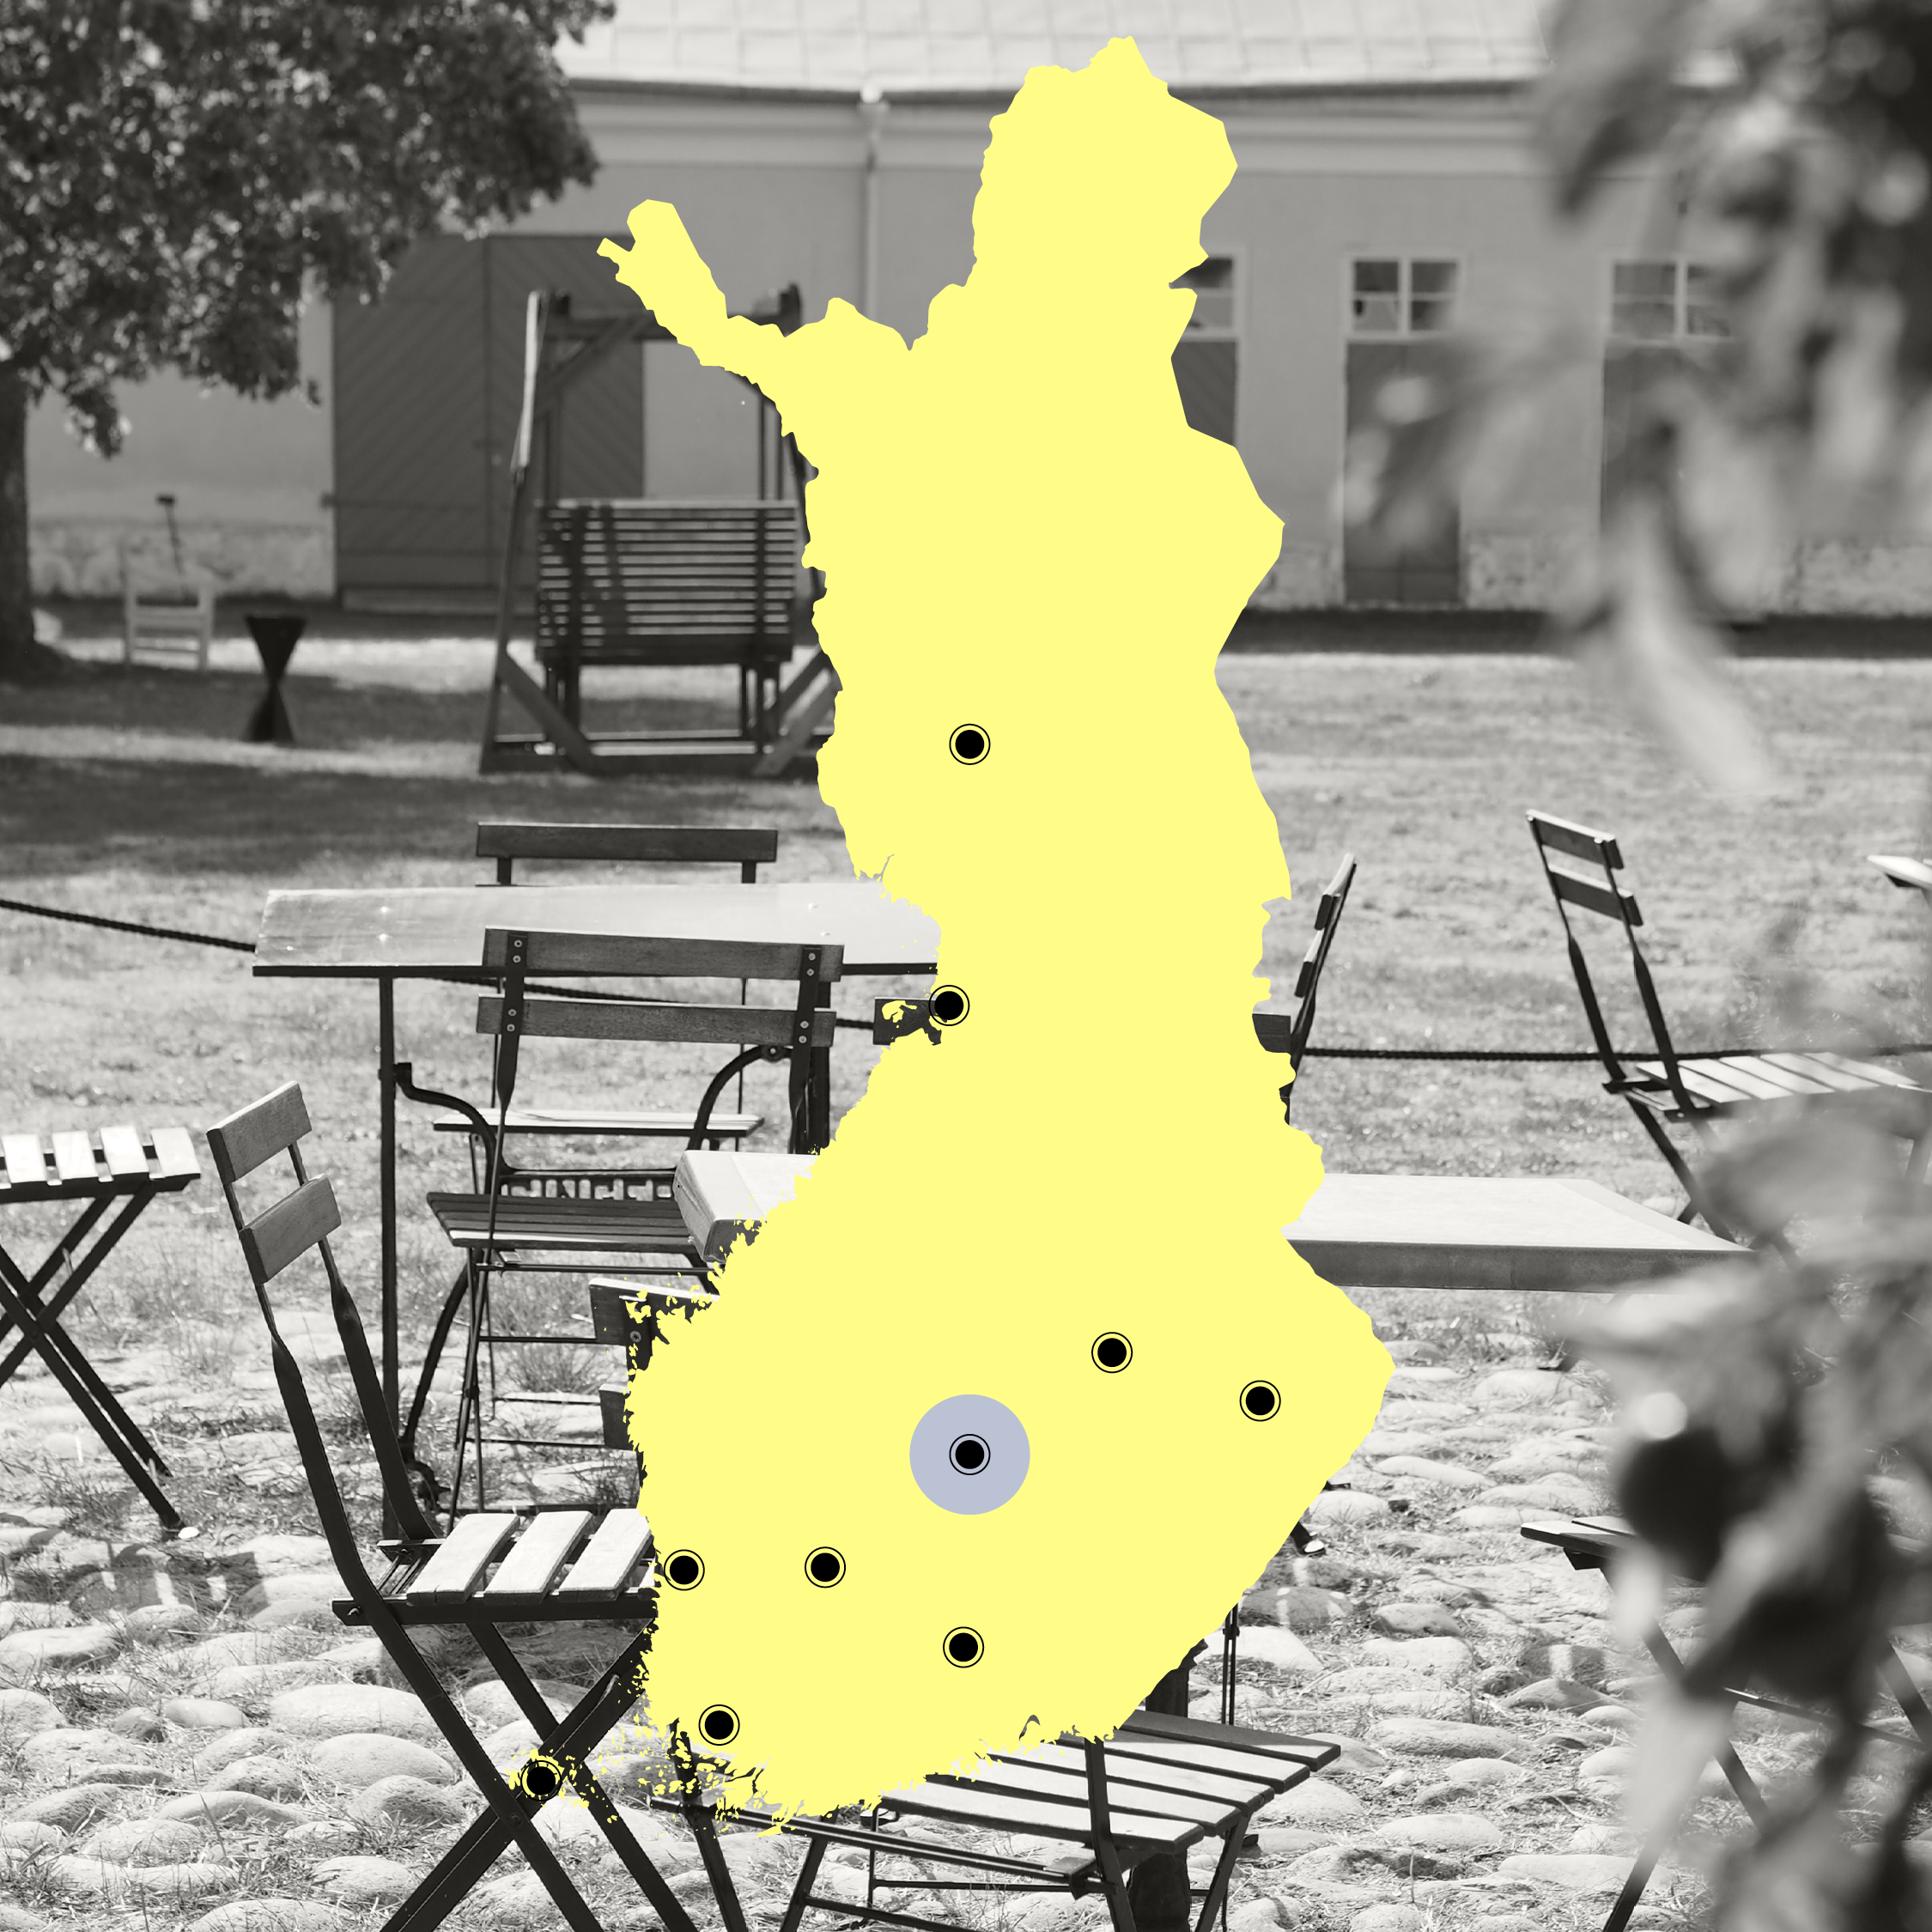 A graphic yellow map of finland lies flat on top of a black and white image of chairs outdoors on a sunny day, with a traditional building in the background.